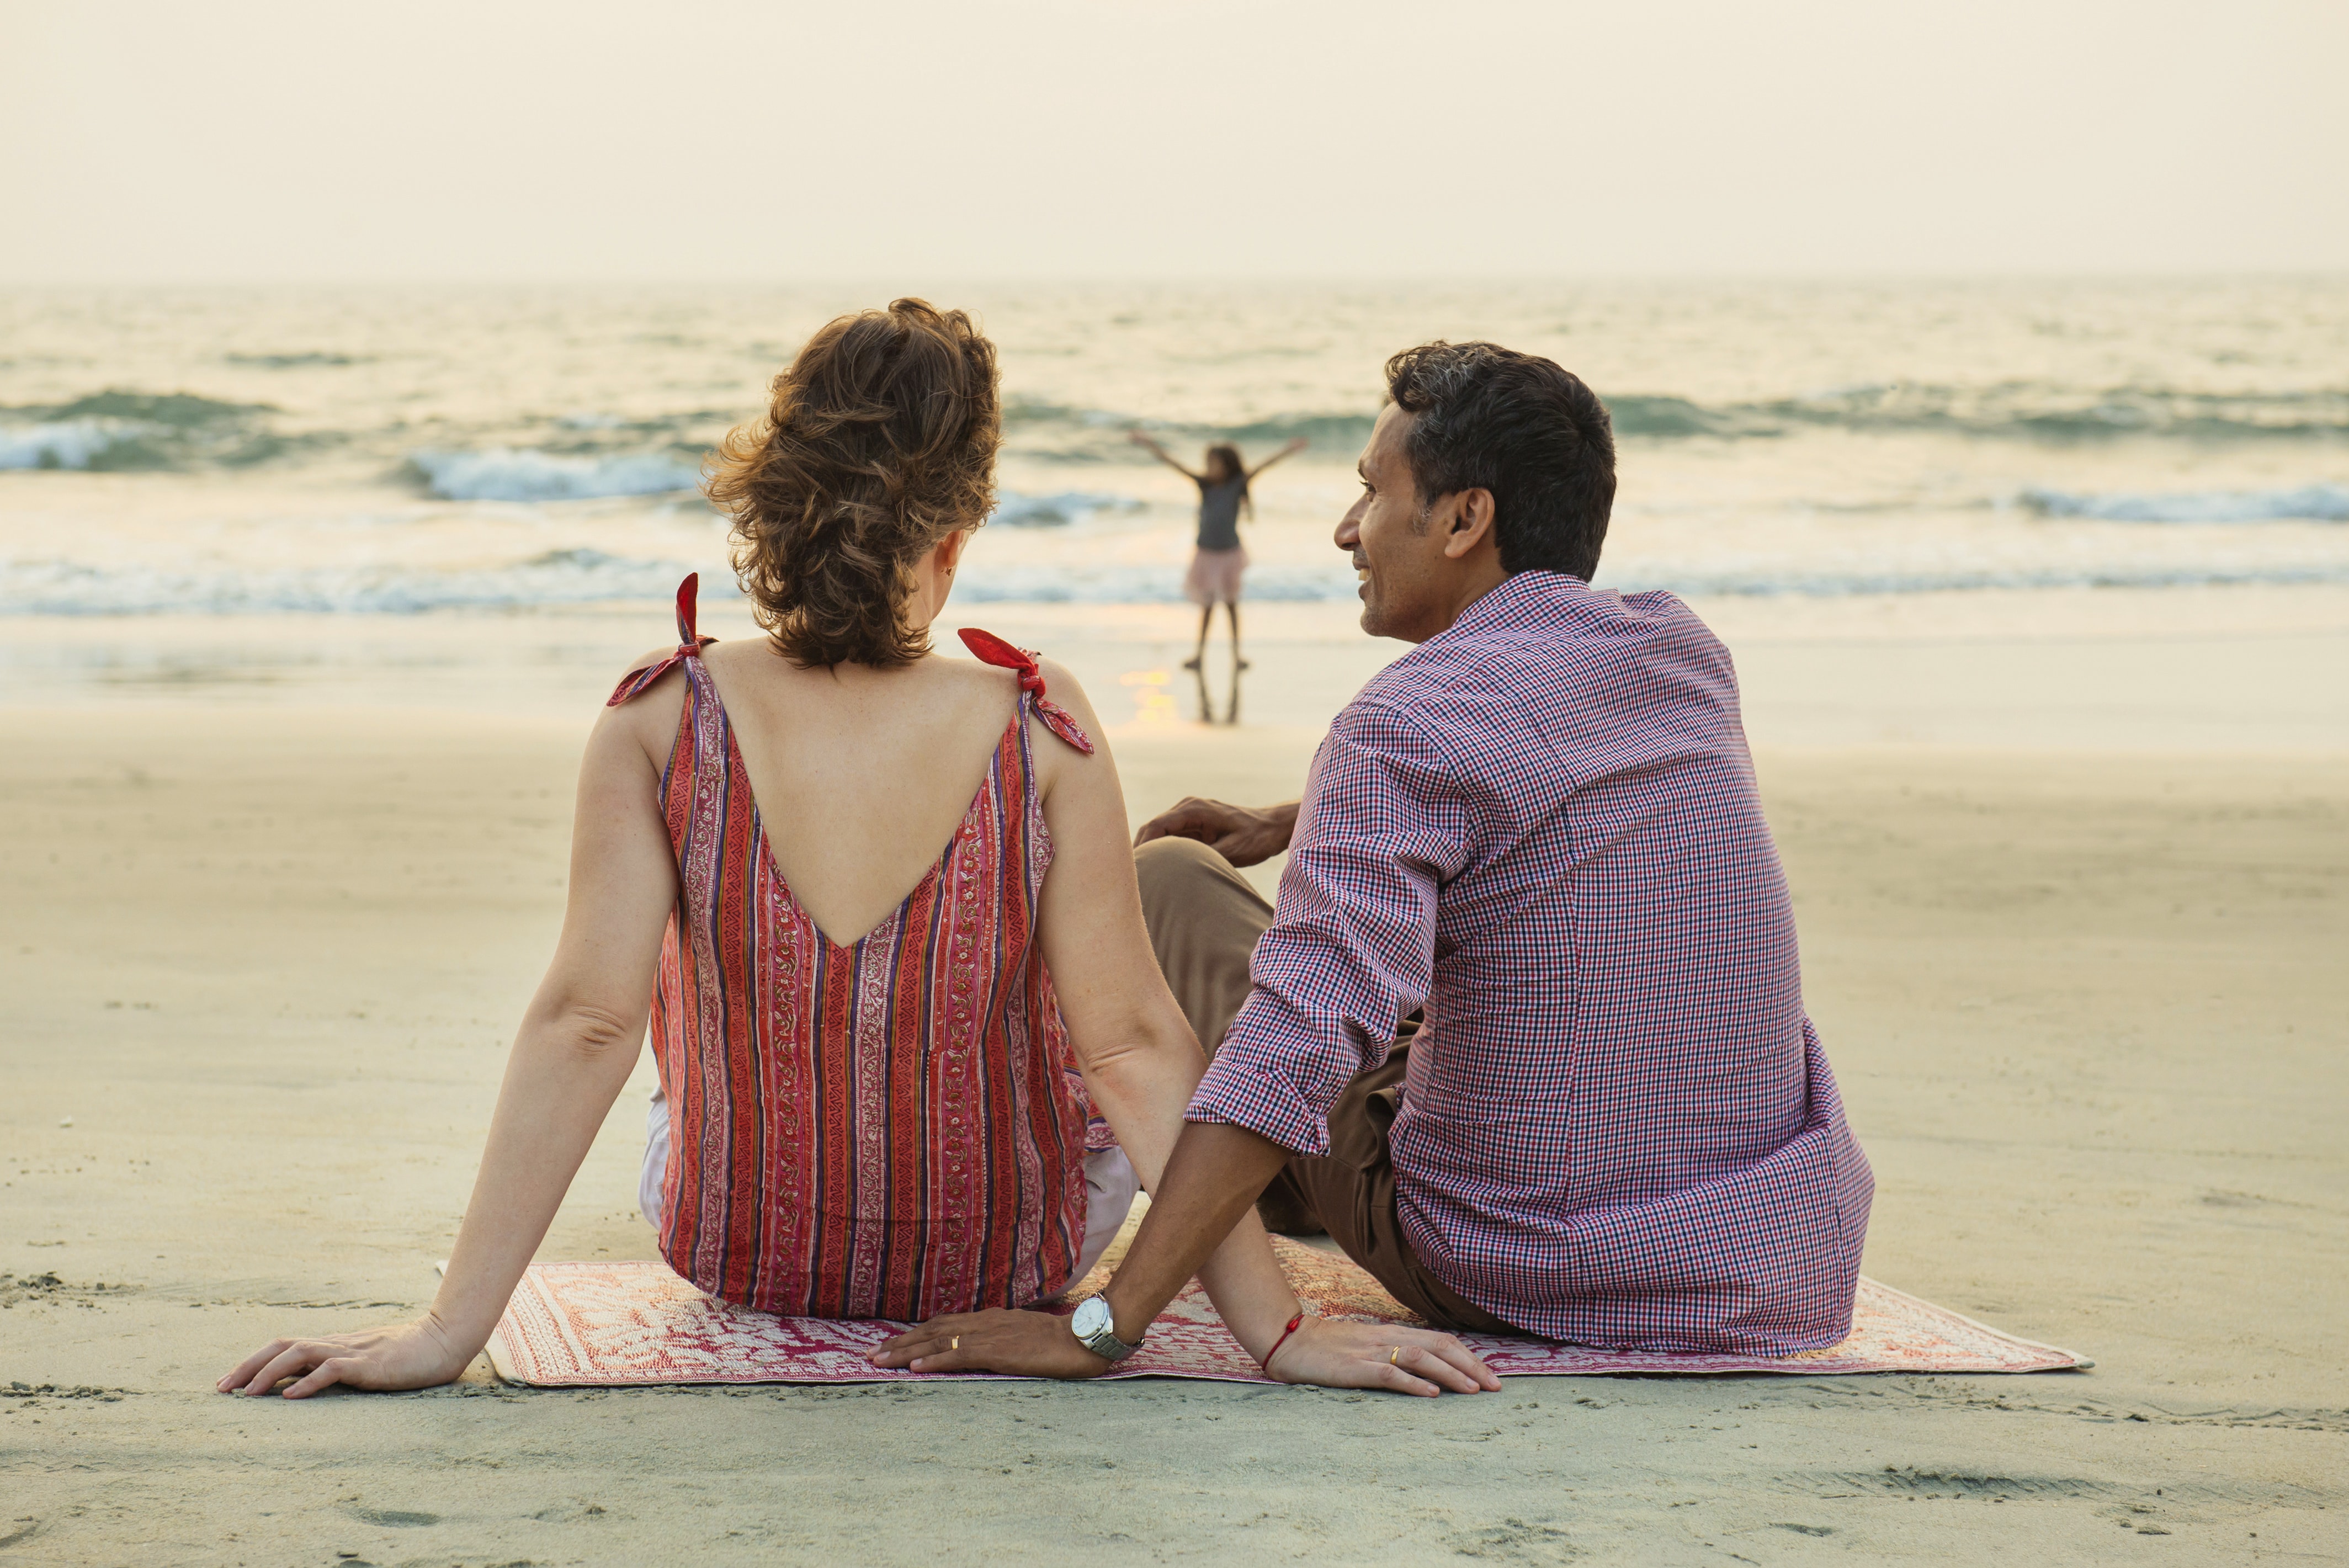 Couple relaxing on beach, looking out to sea